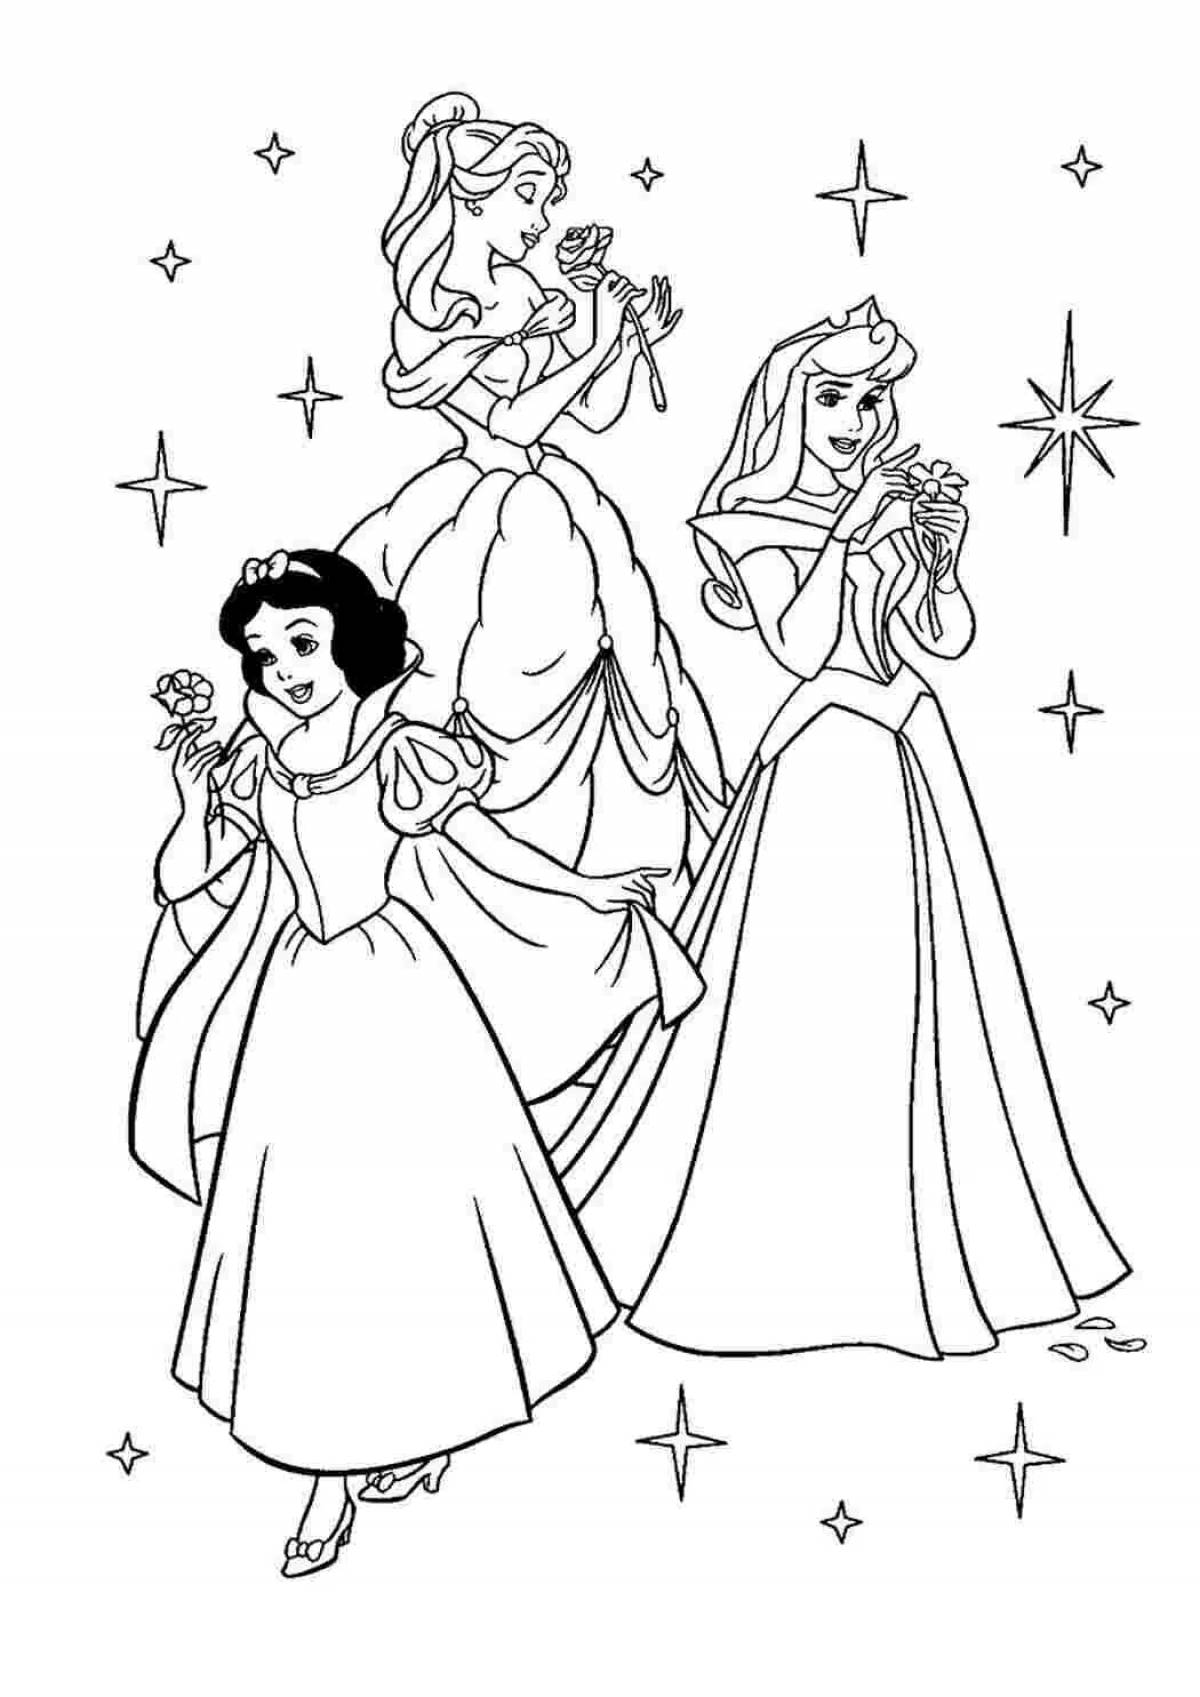 Princess coloring pages for girls 4 years old